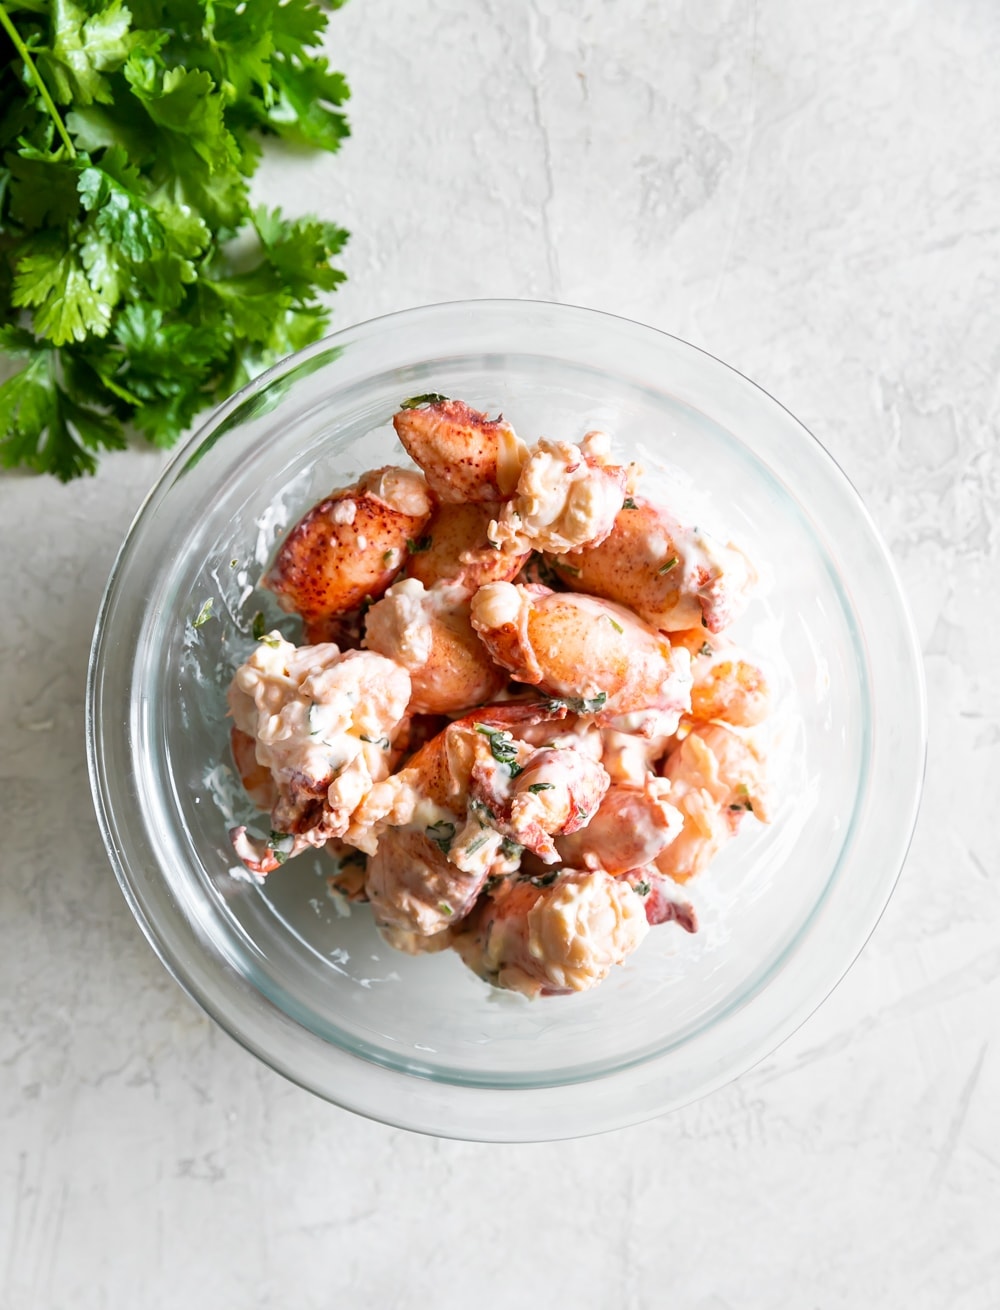 chopped lobster meat tossed with mayo, lemon juice, and herbs